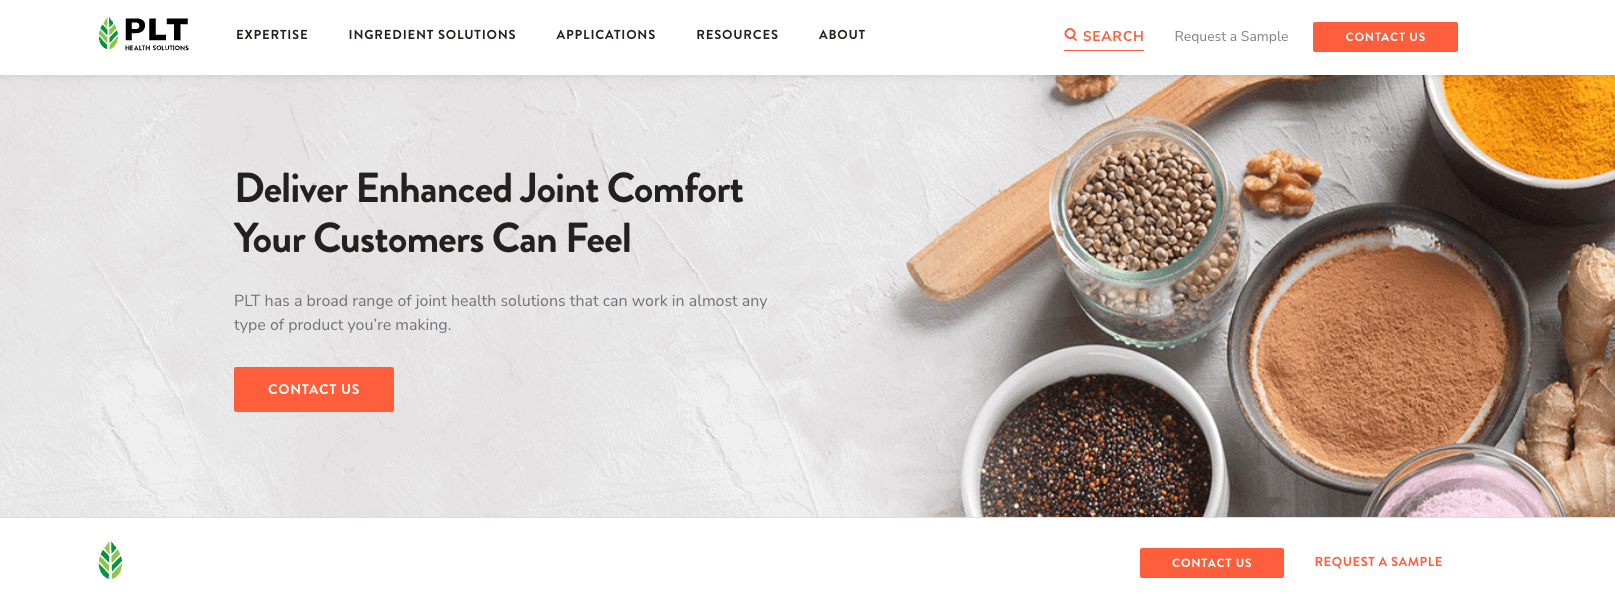 A screenshot of a food ingredient manufacturer’s website. There is a photograph of small glass bowls filled with powders and other ingredients, and the headline, “Deliver Enhanced Joint Comfort Your Customers Can Feel.” There is a prominent orange button that says “Contact Us” on the image. Above and below the image there is link text that reads “Request a Sample.”